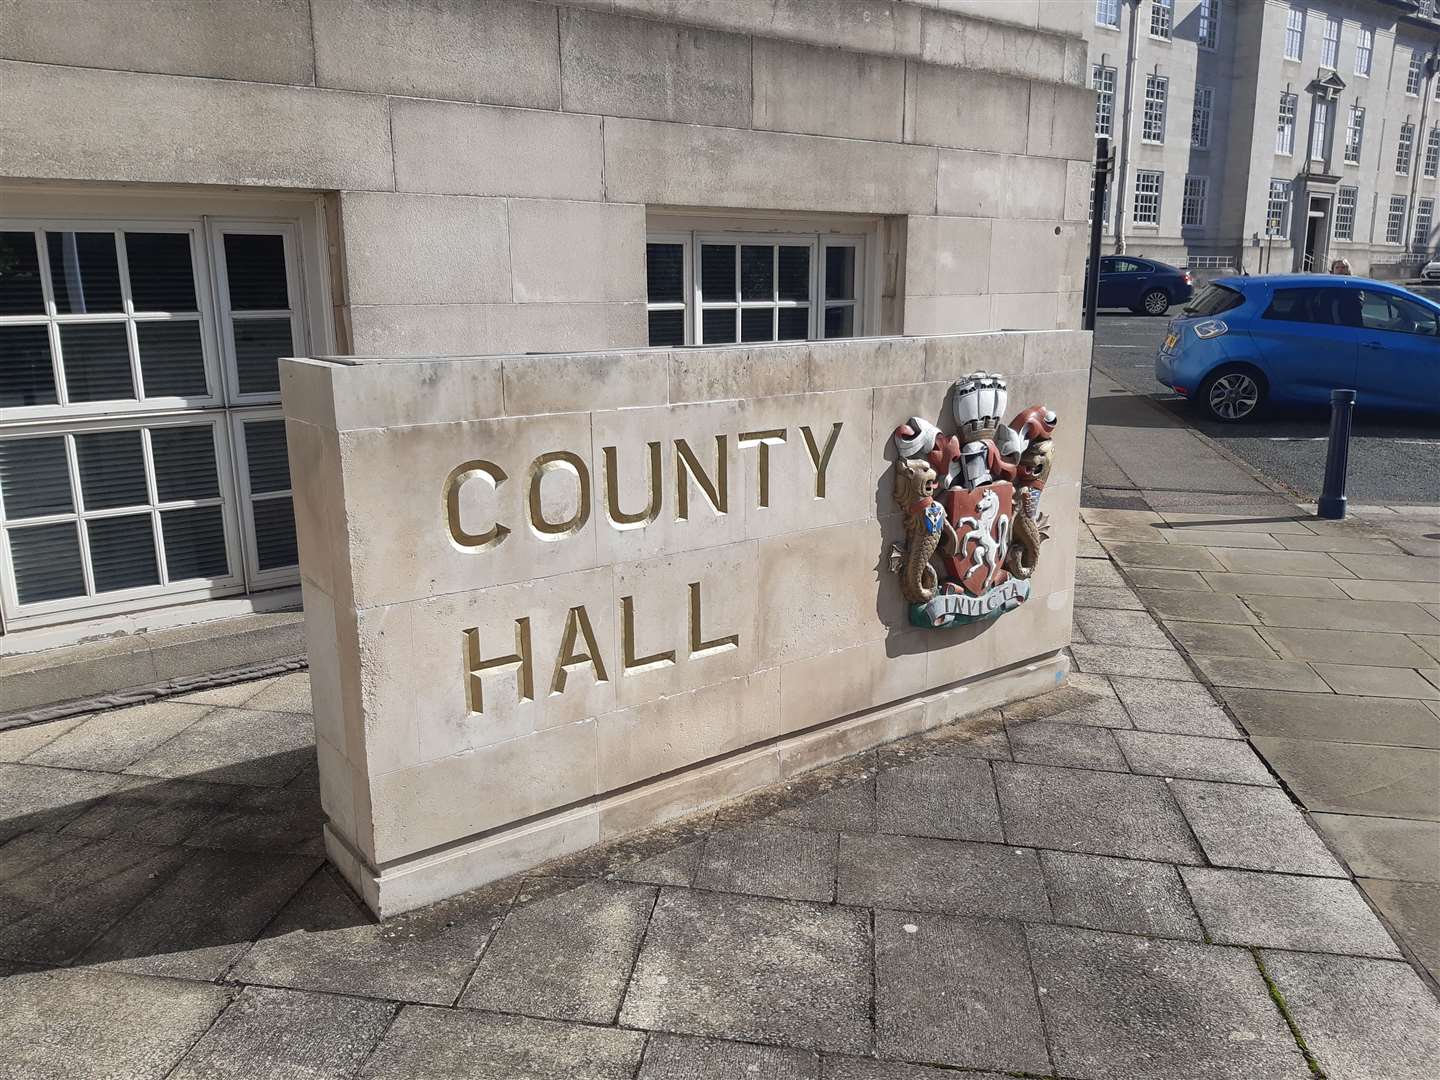 The old Maidstone vs Canterbury county town debate - turned on its head by ChatGPT